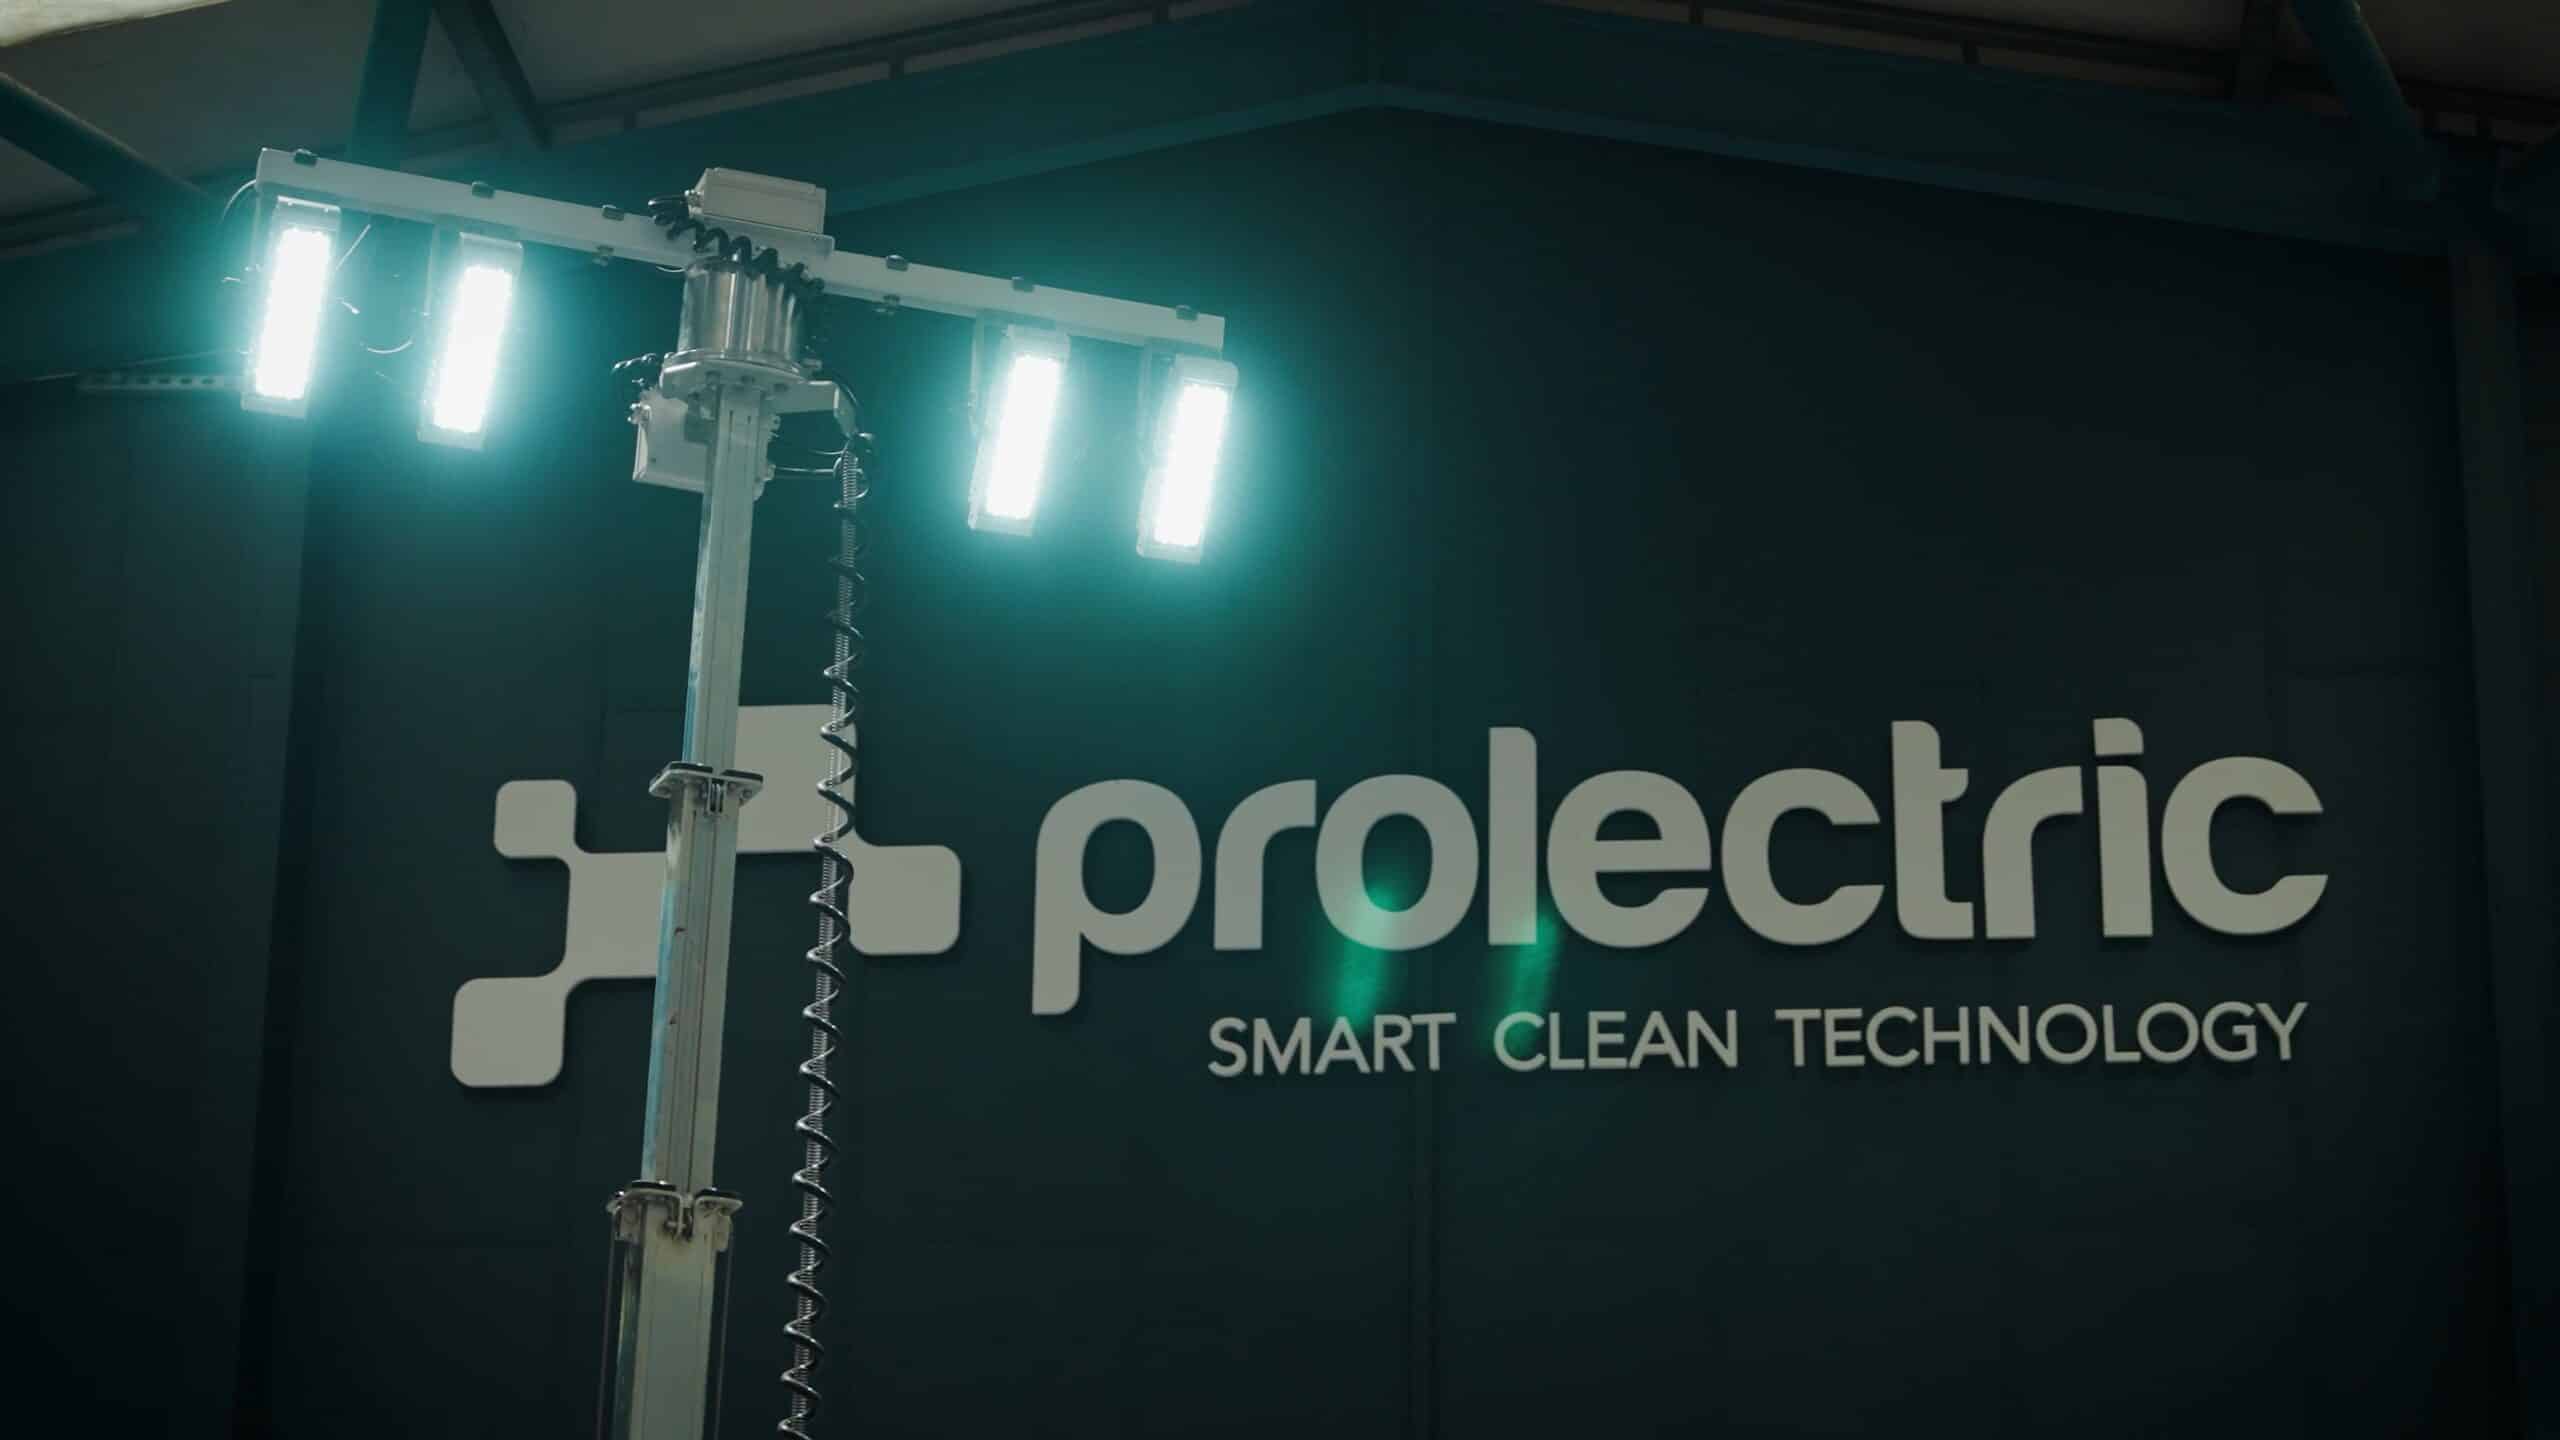 Prolight next to Prolectric Logo in factory